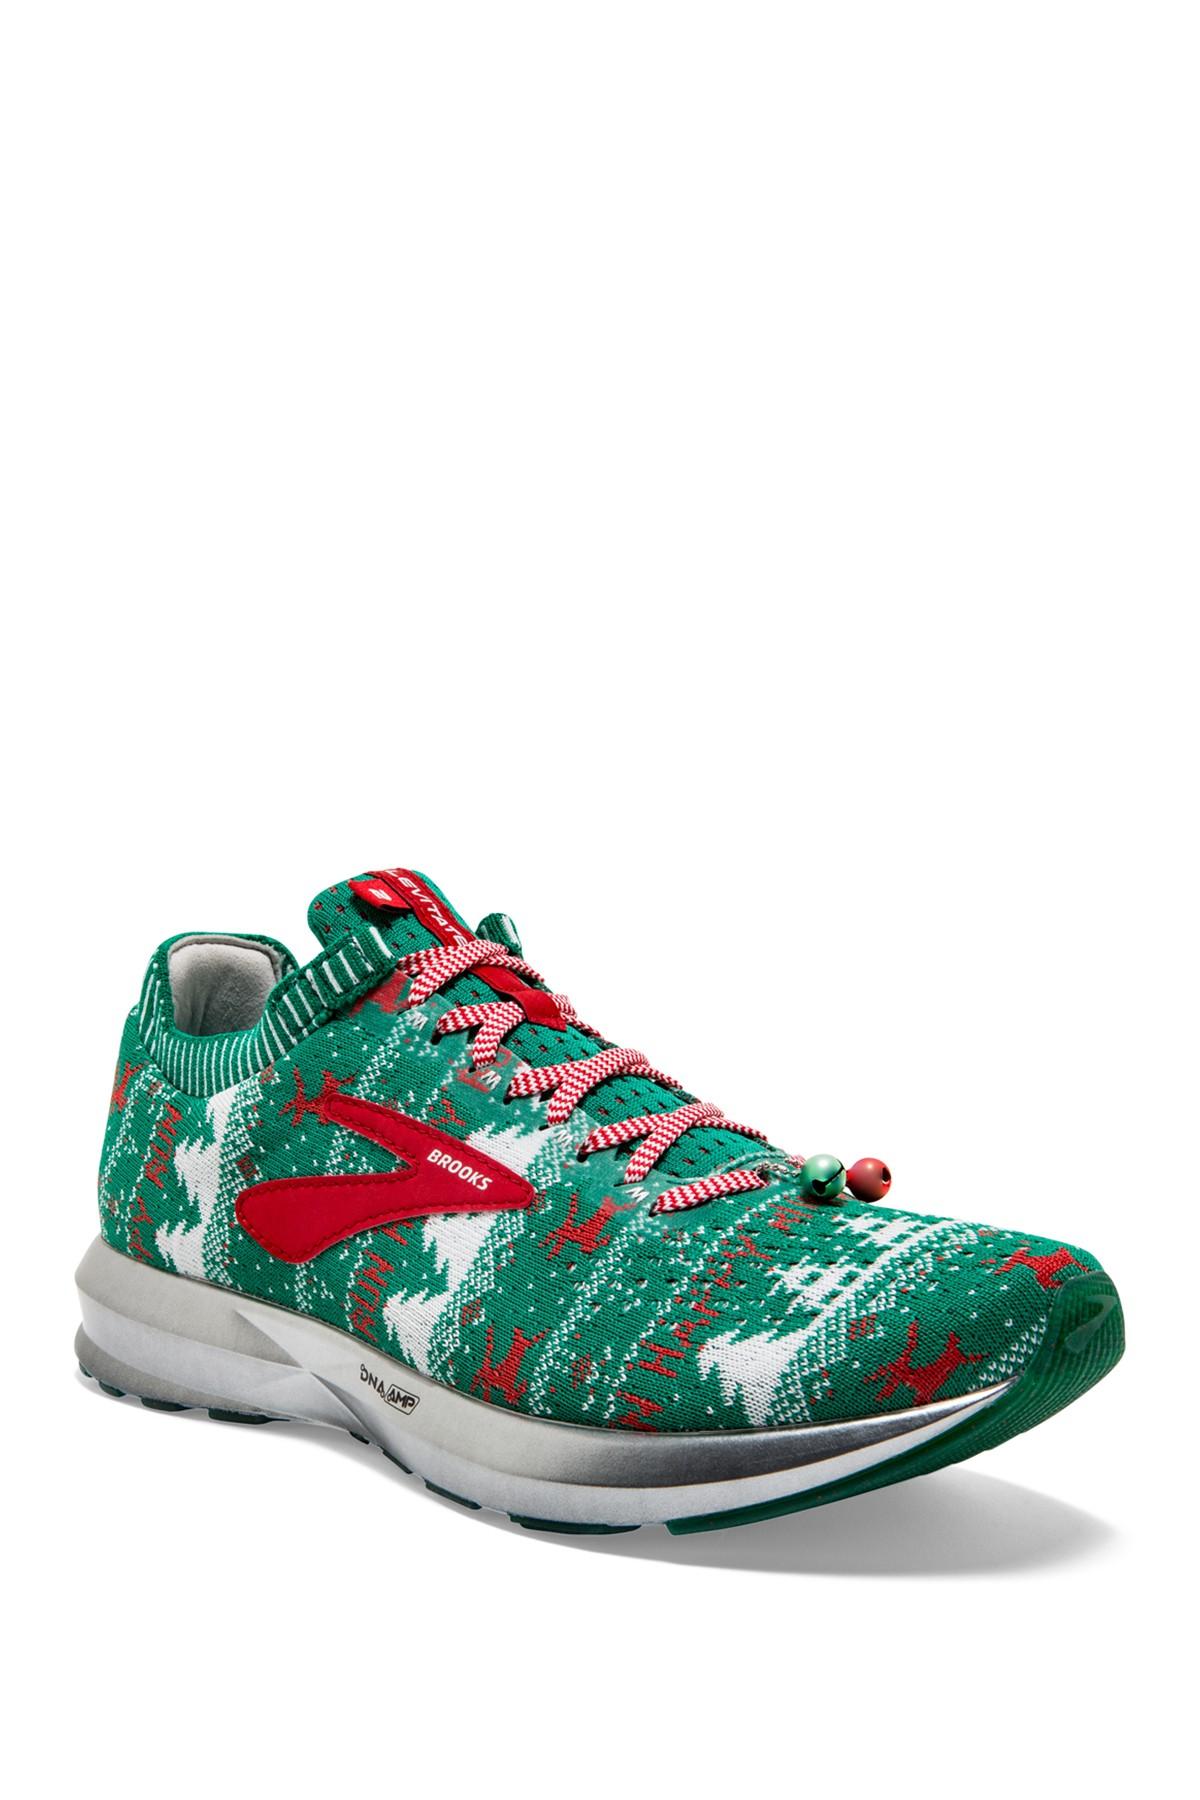 brooks women's levitate 2 ugly sweater running shoes